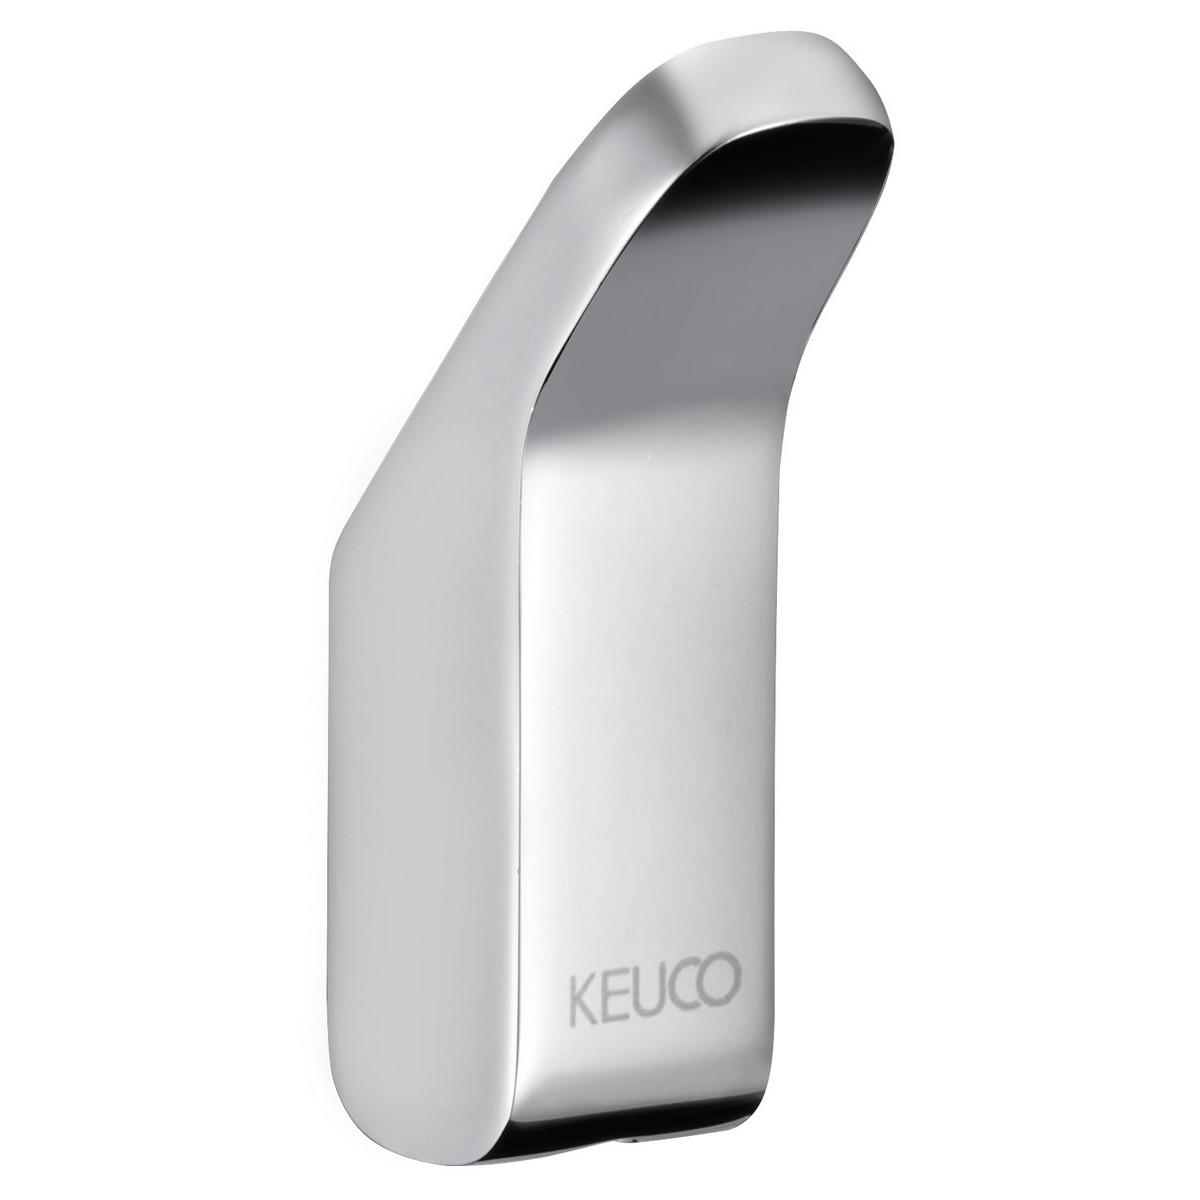 KEUCO 12715010000 MOLL 3/4 INCH WALL MOUNTED TOWEL HOOK IN POLISHED CHROME